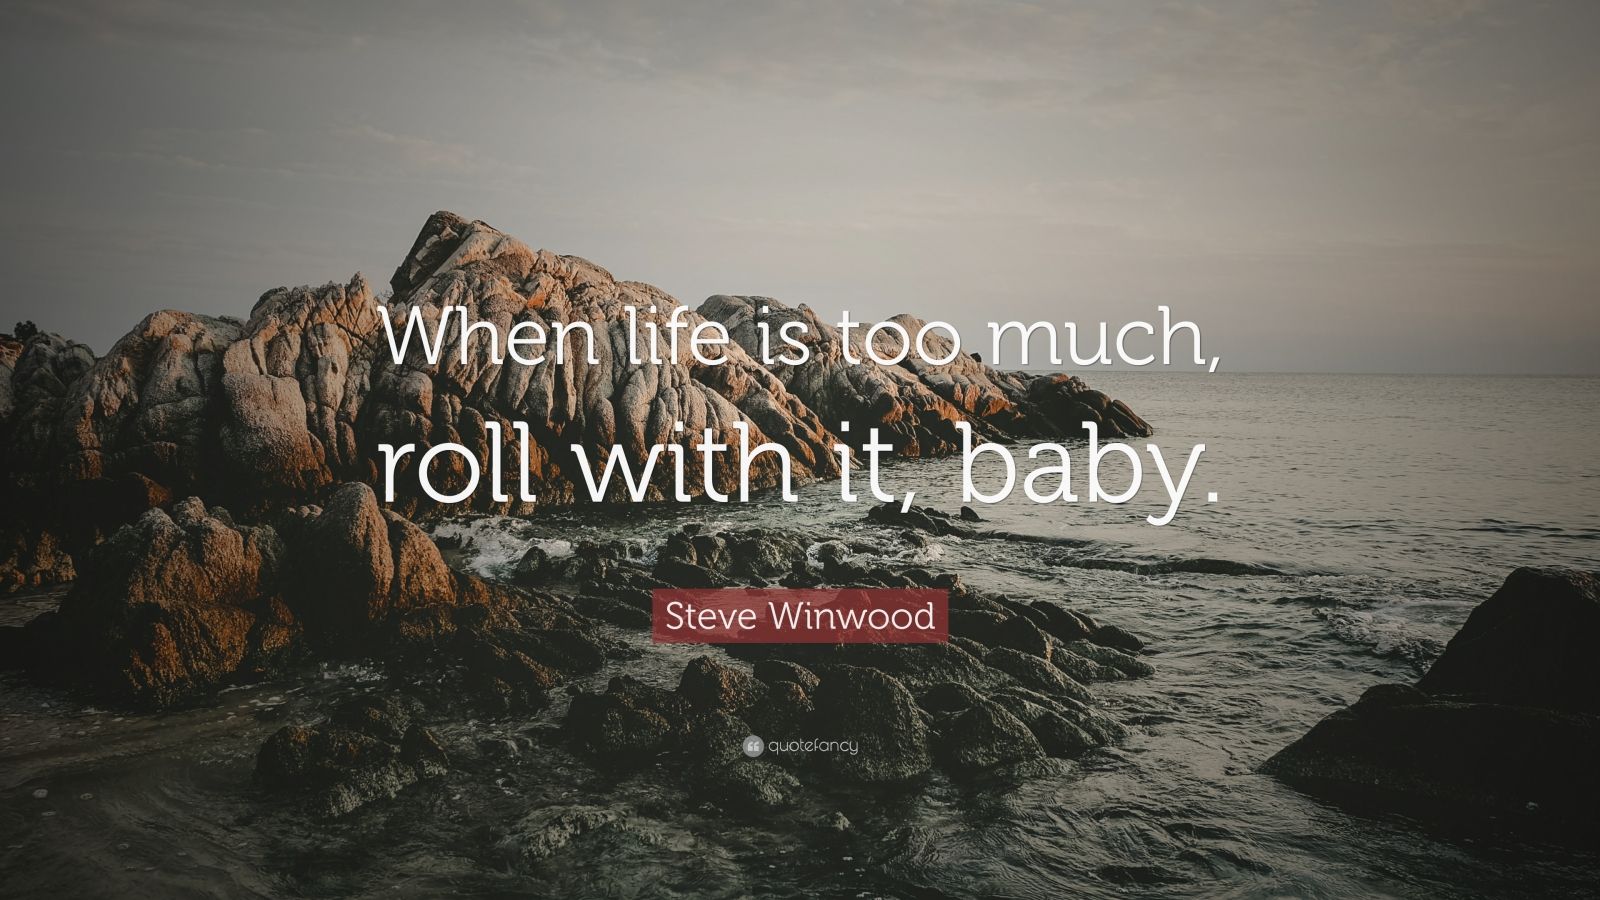 steve winwood roll with it baby